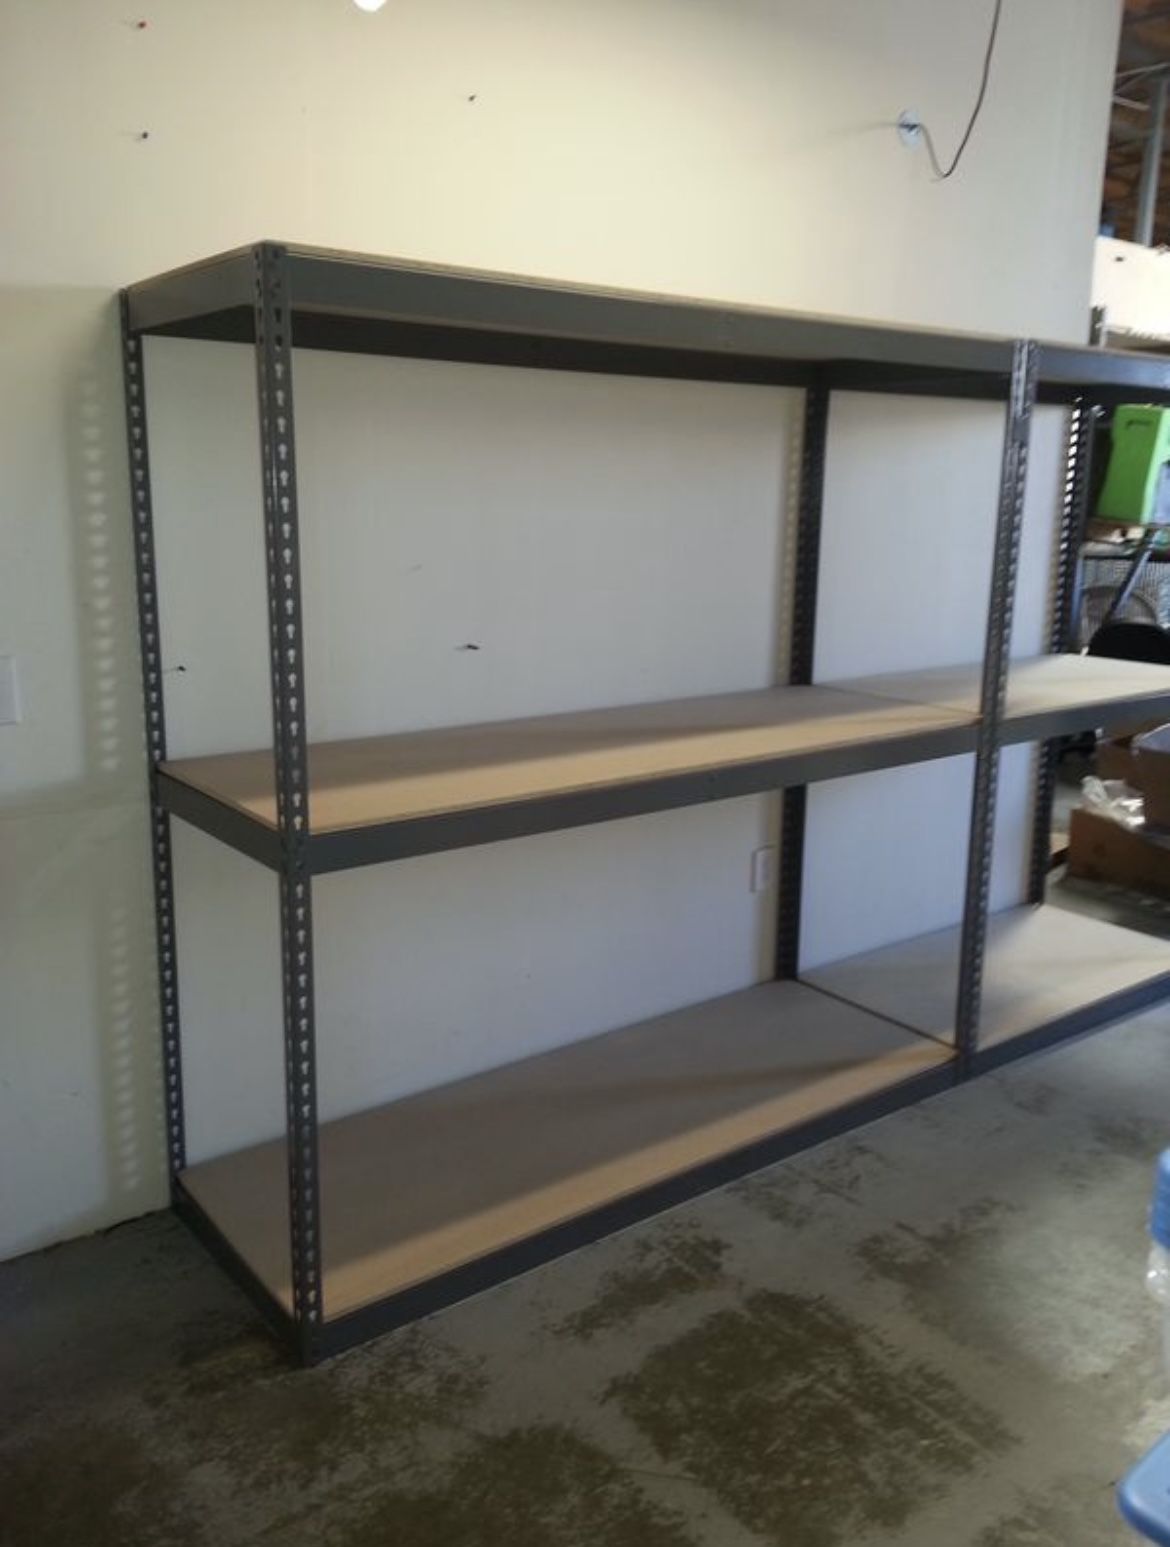 Industrial Shelving 72 in W x 24 in D Boltless Warehouse Shelves Garage Storage Racks New! Delivery Available